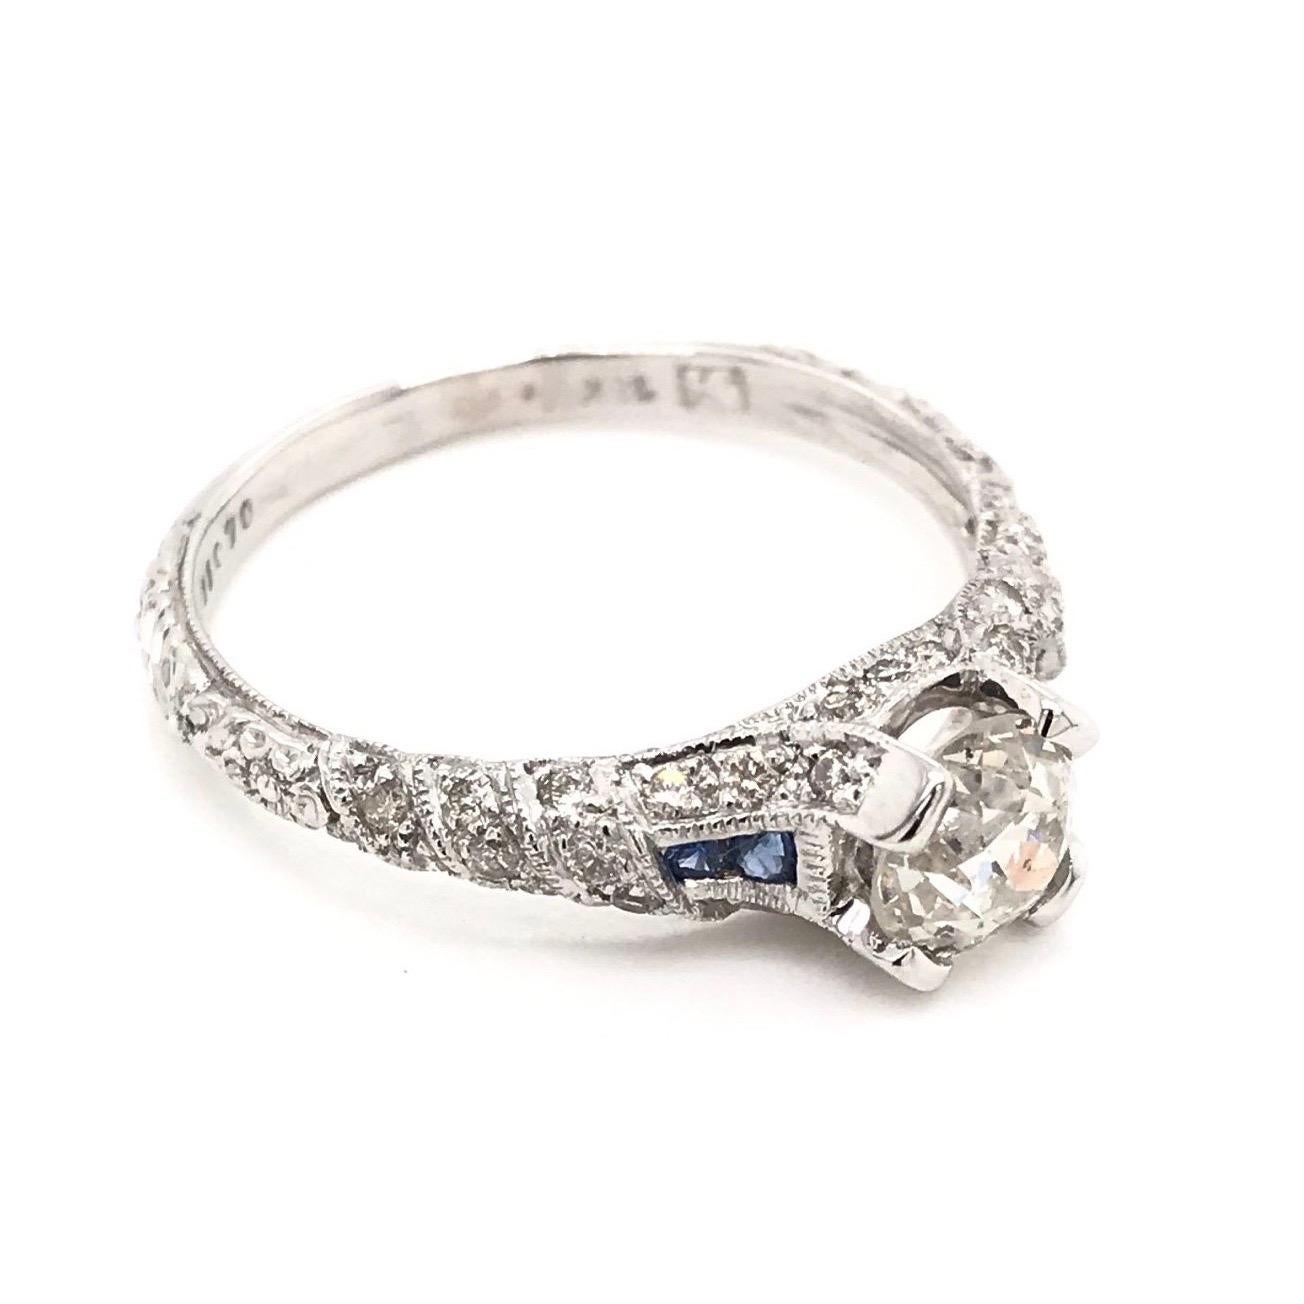 This diamond and sapphire ring is an estate piece. The setting is 18k white gold and features a 0.90 carat center diamond. The center Old European Cut diamond grades approximately J in color, SI1 in clarity. The white gold setting features 36